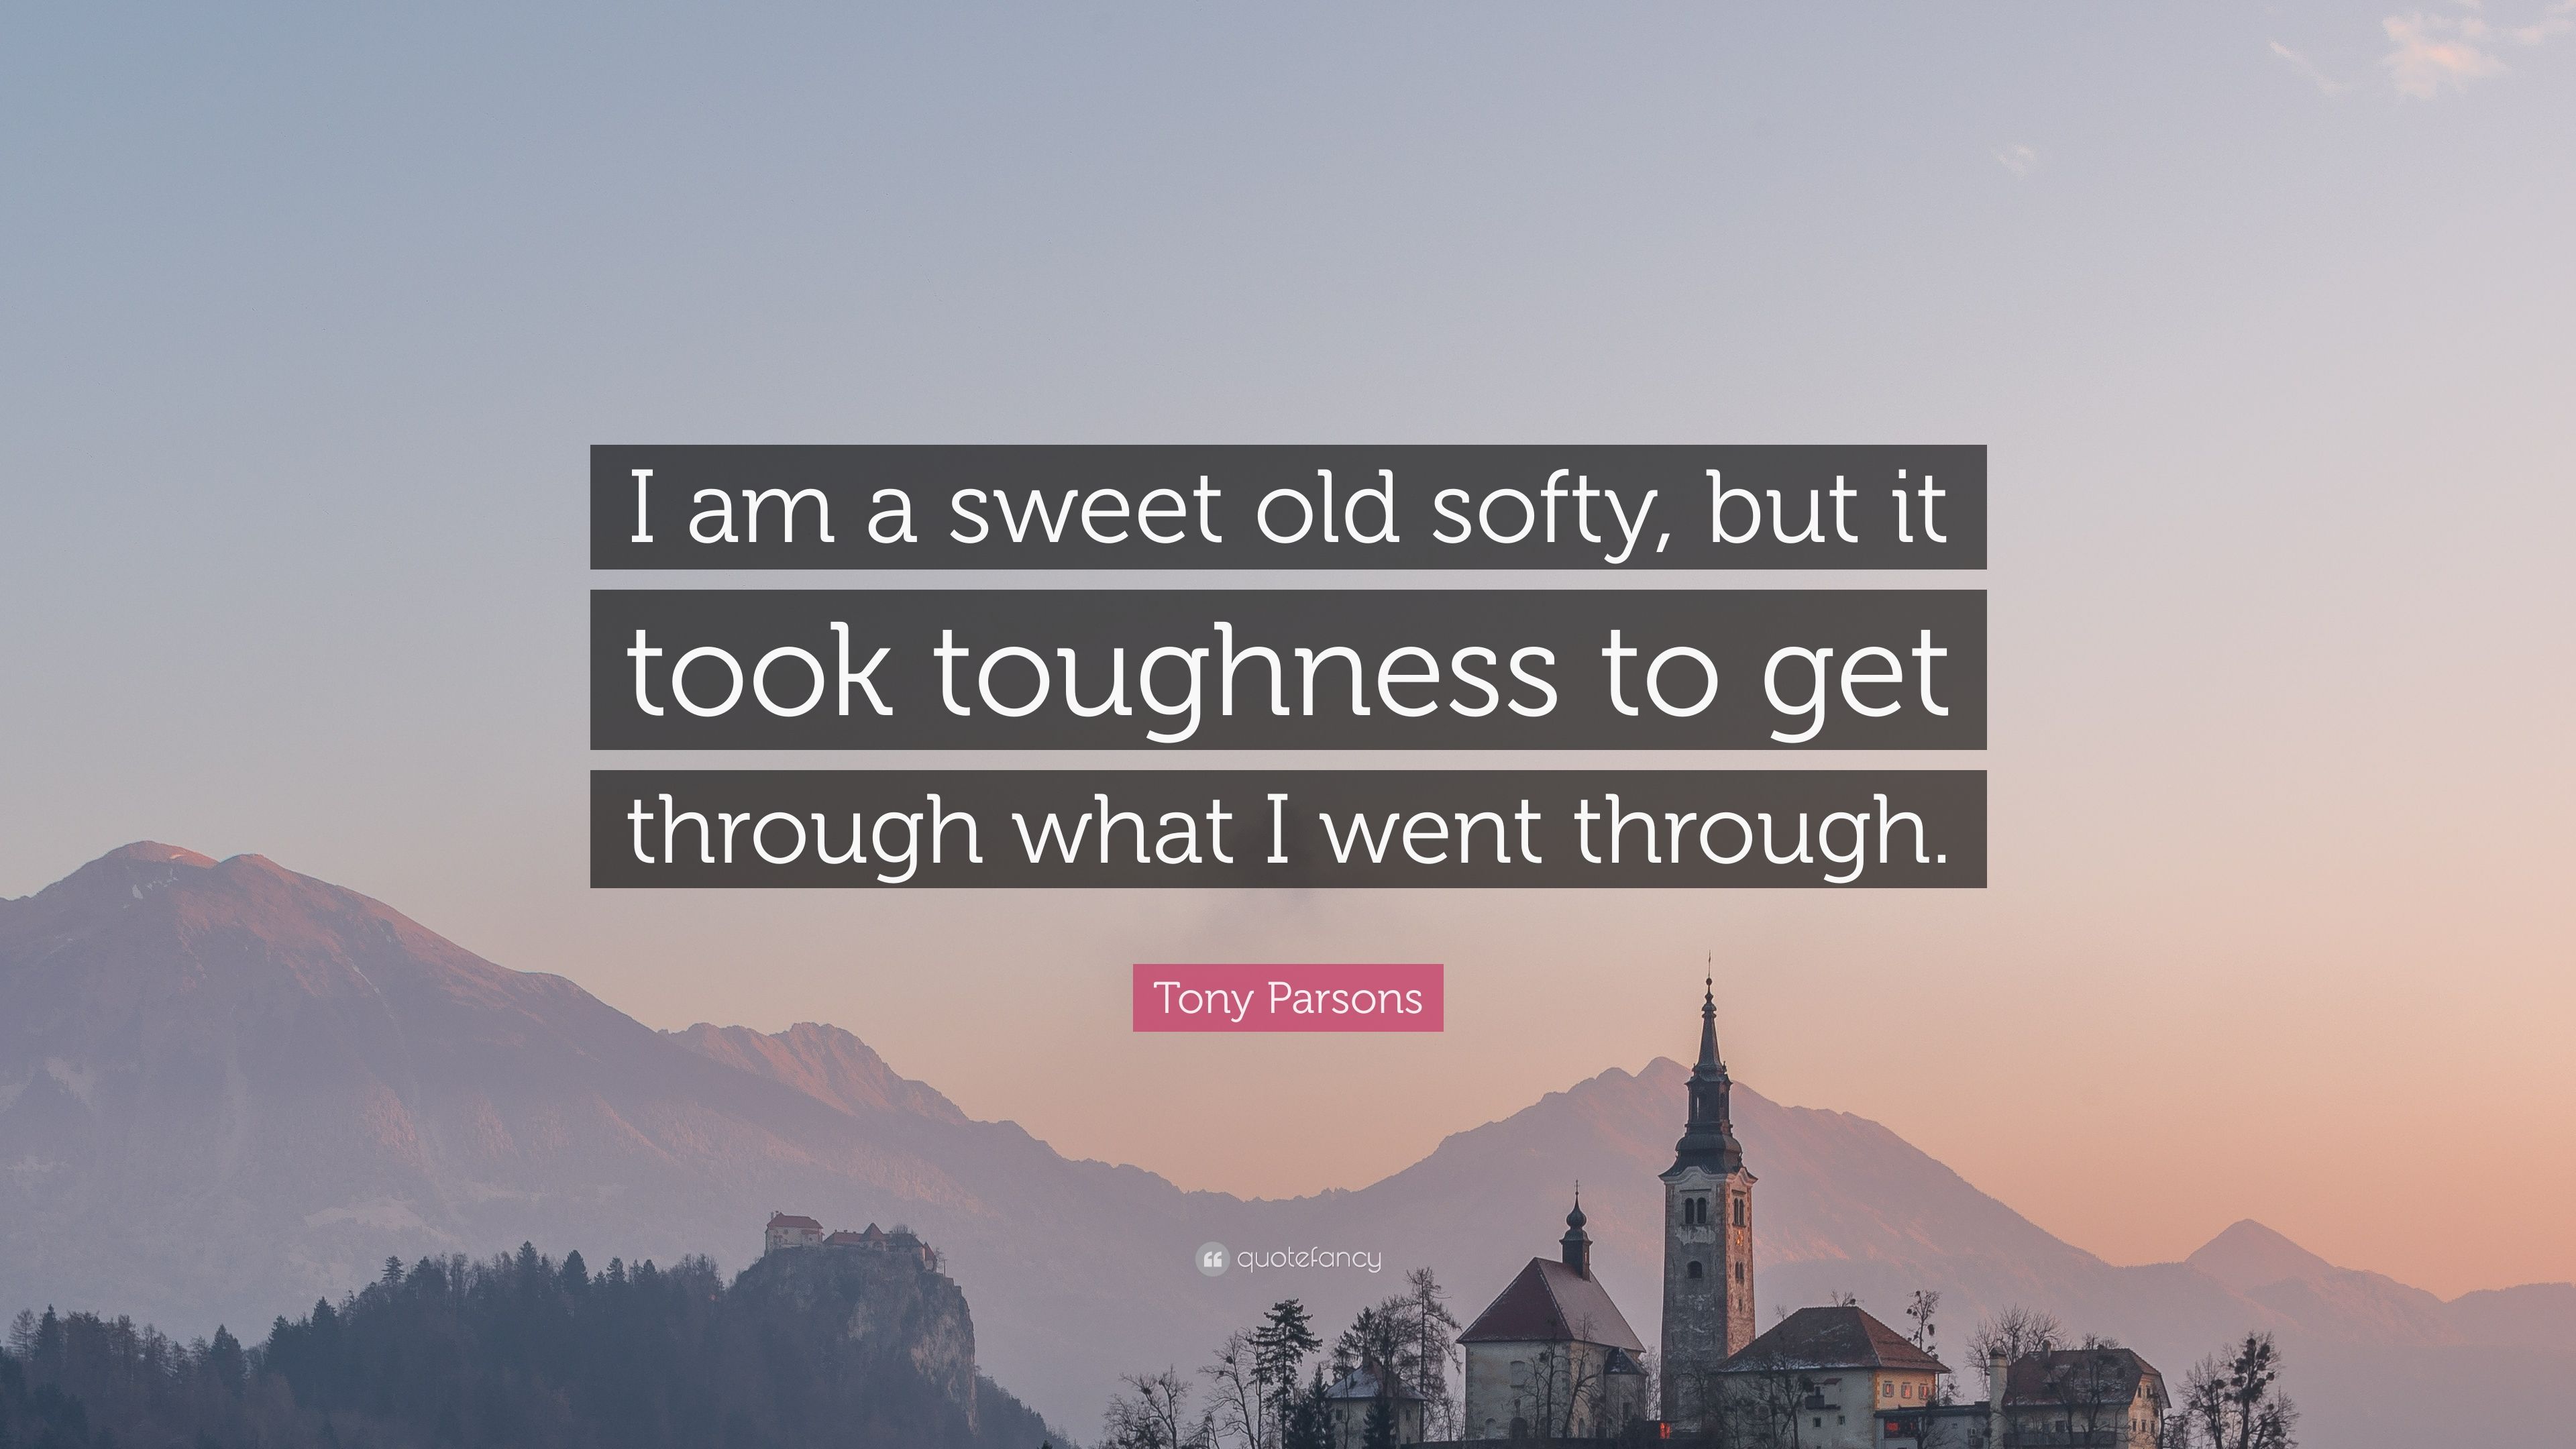 Tony Parsons Quote: "I am a sweet old softy, but it took toughness.